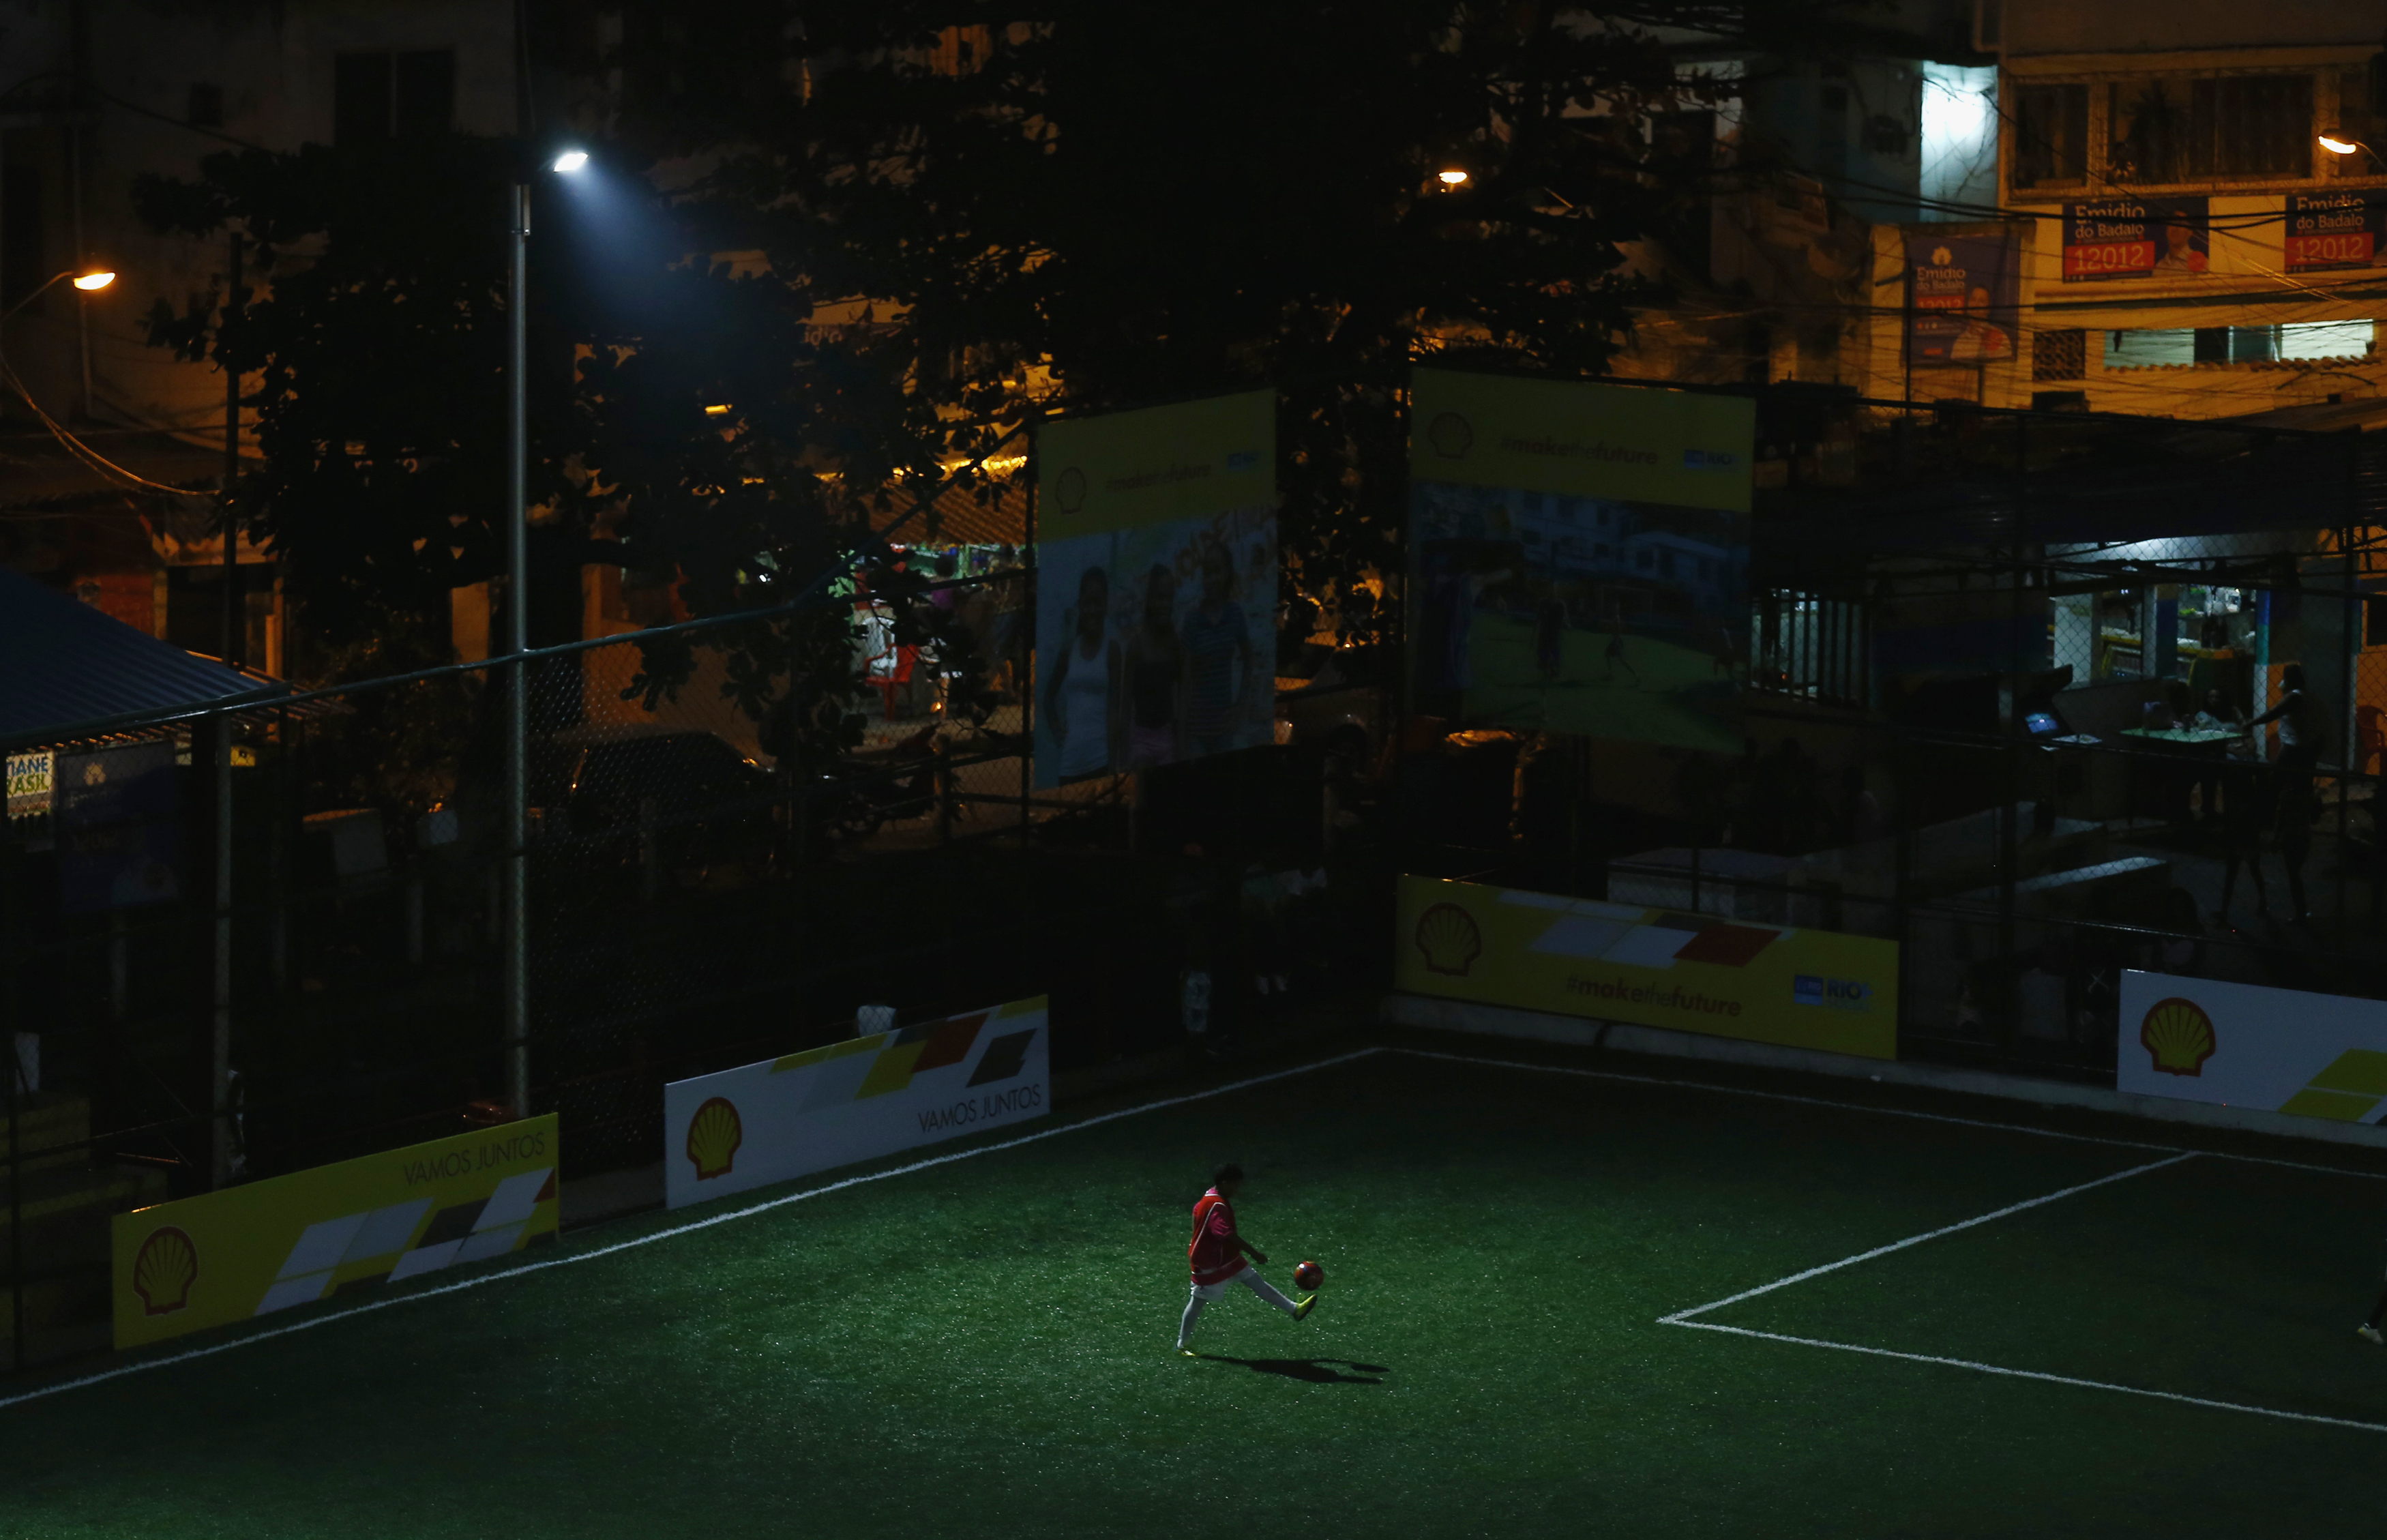 Kid plays with soccer ball at a refurbished soccer field at the Mineira slum in Rio de Janeiro